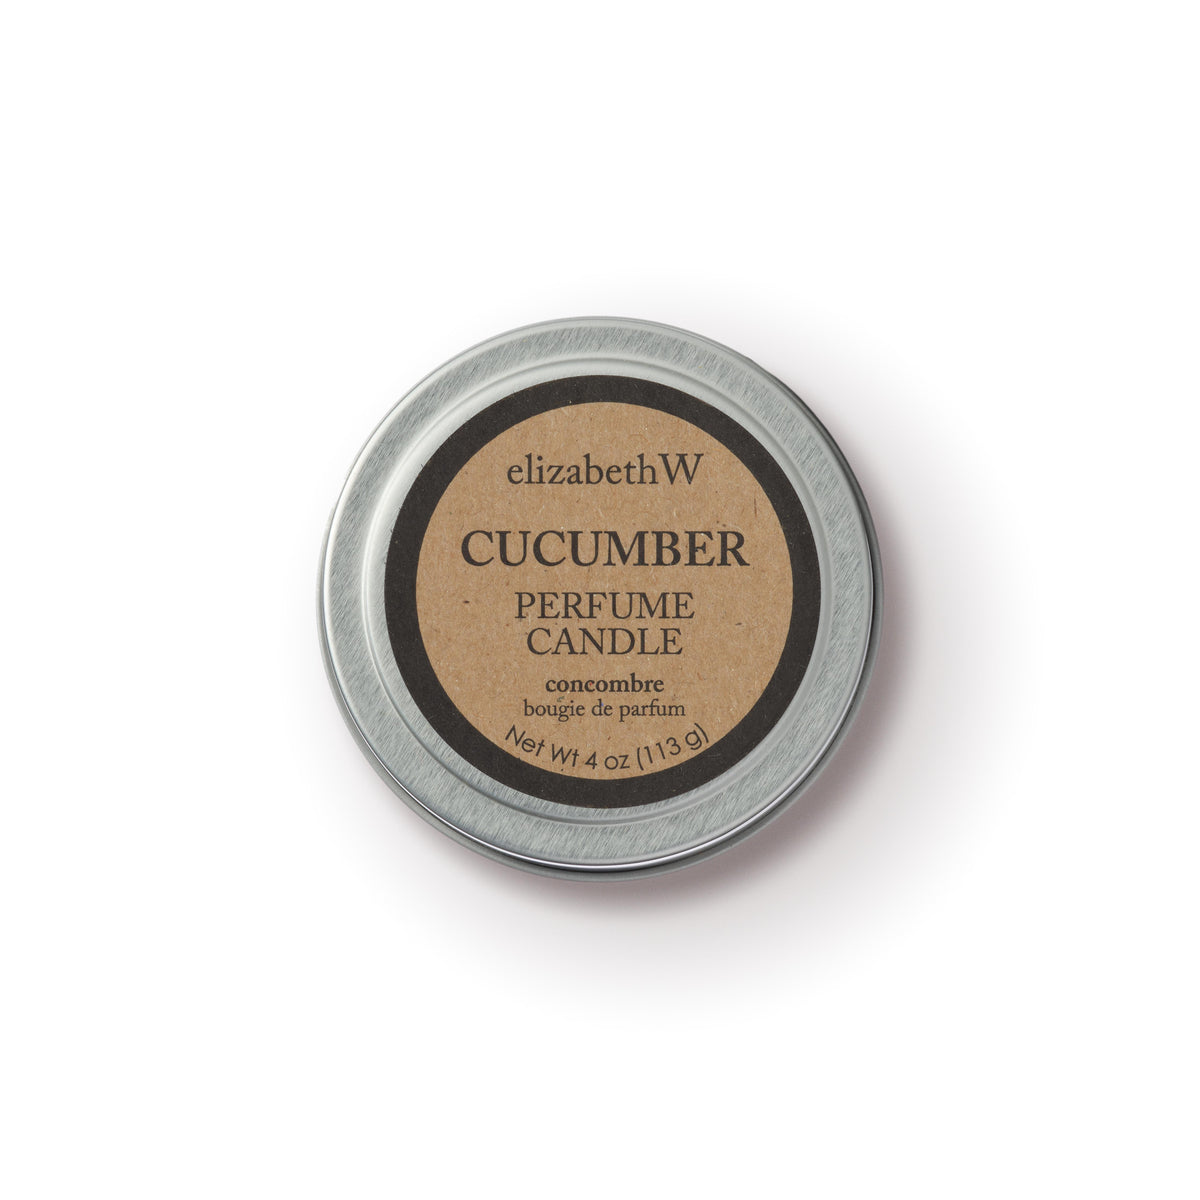 Cucumber Travel Candle